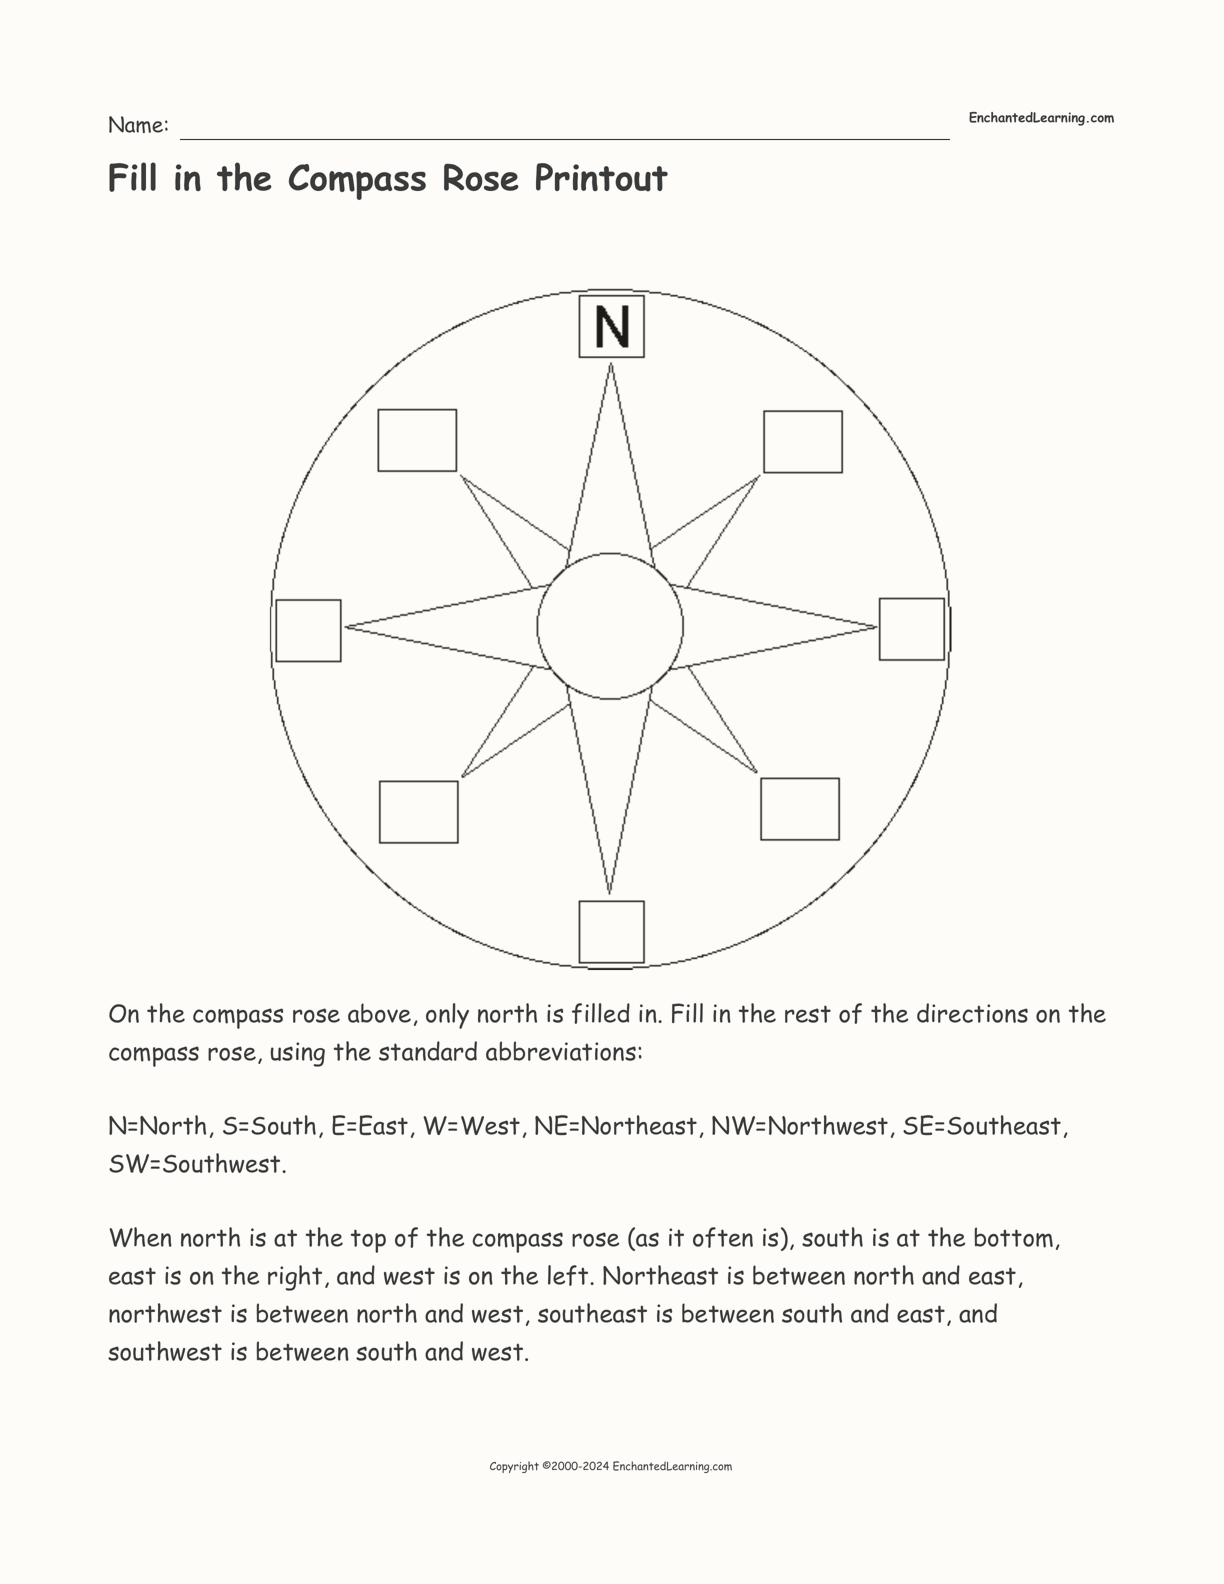 Fill in the Compass Rose Printout interactive worksheet page 1